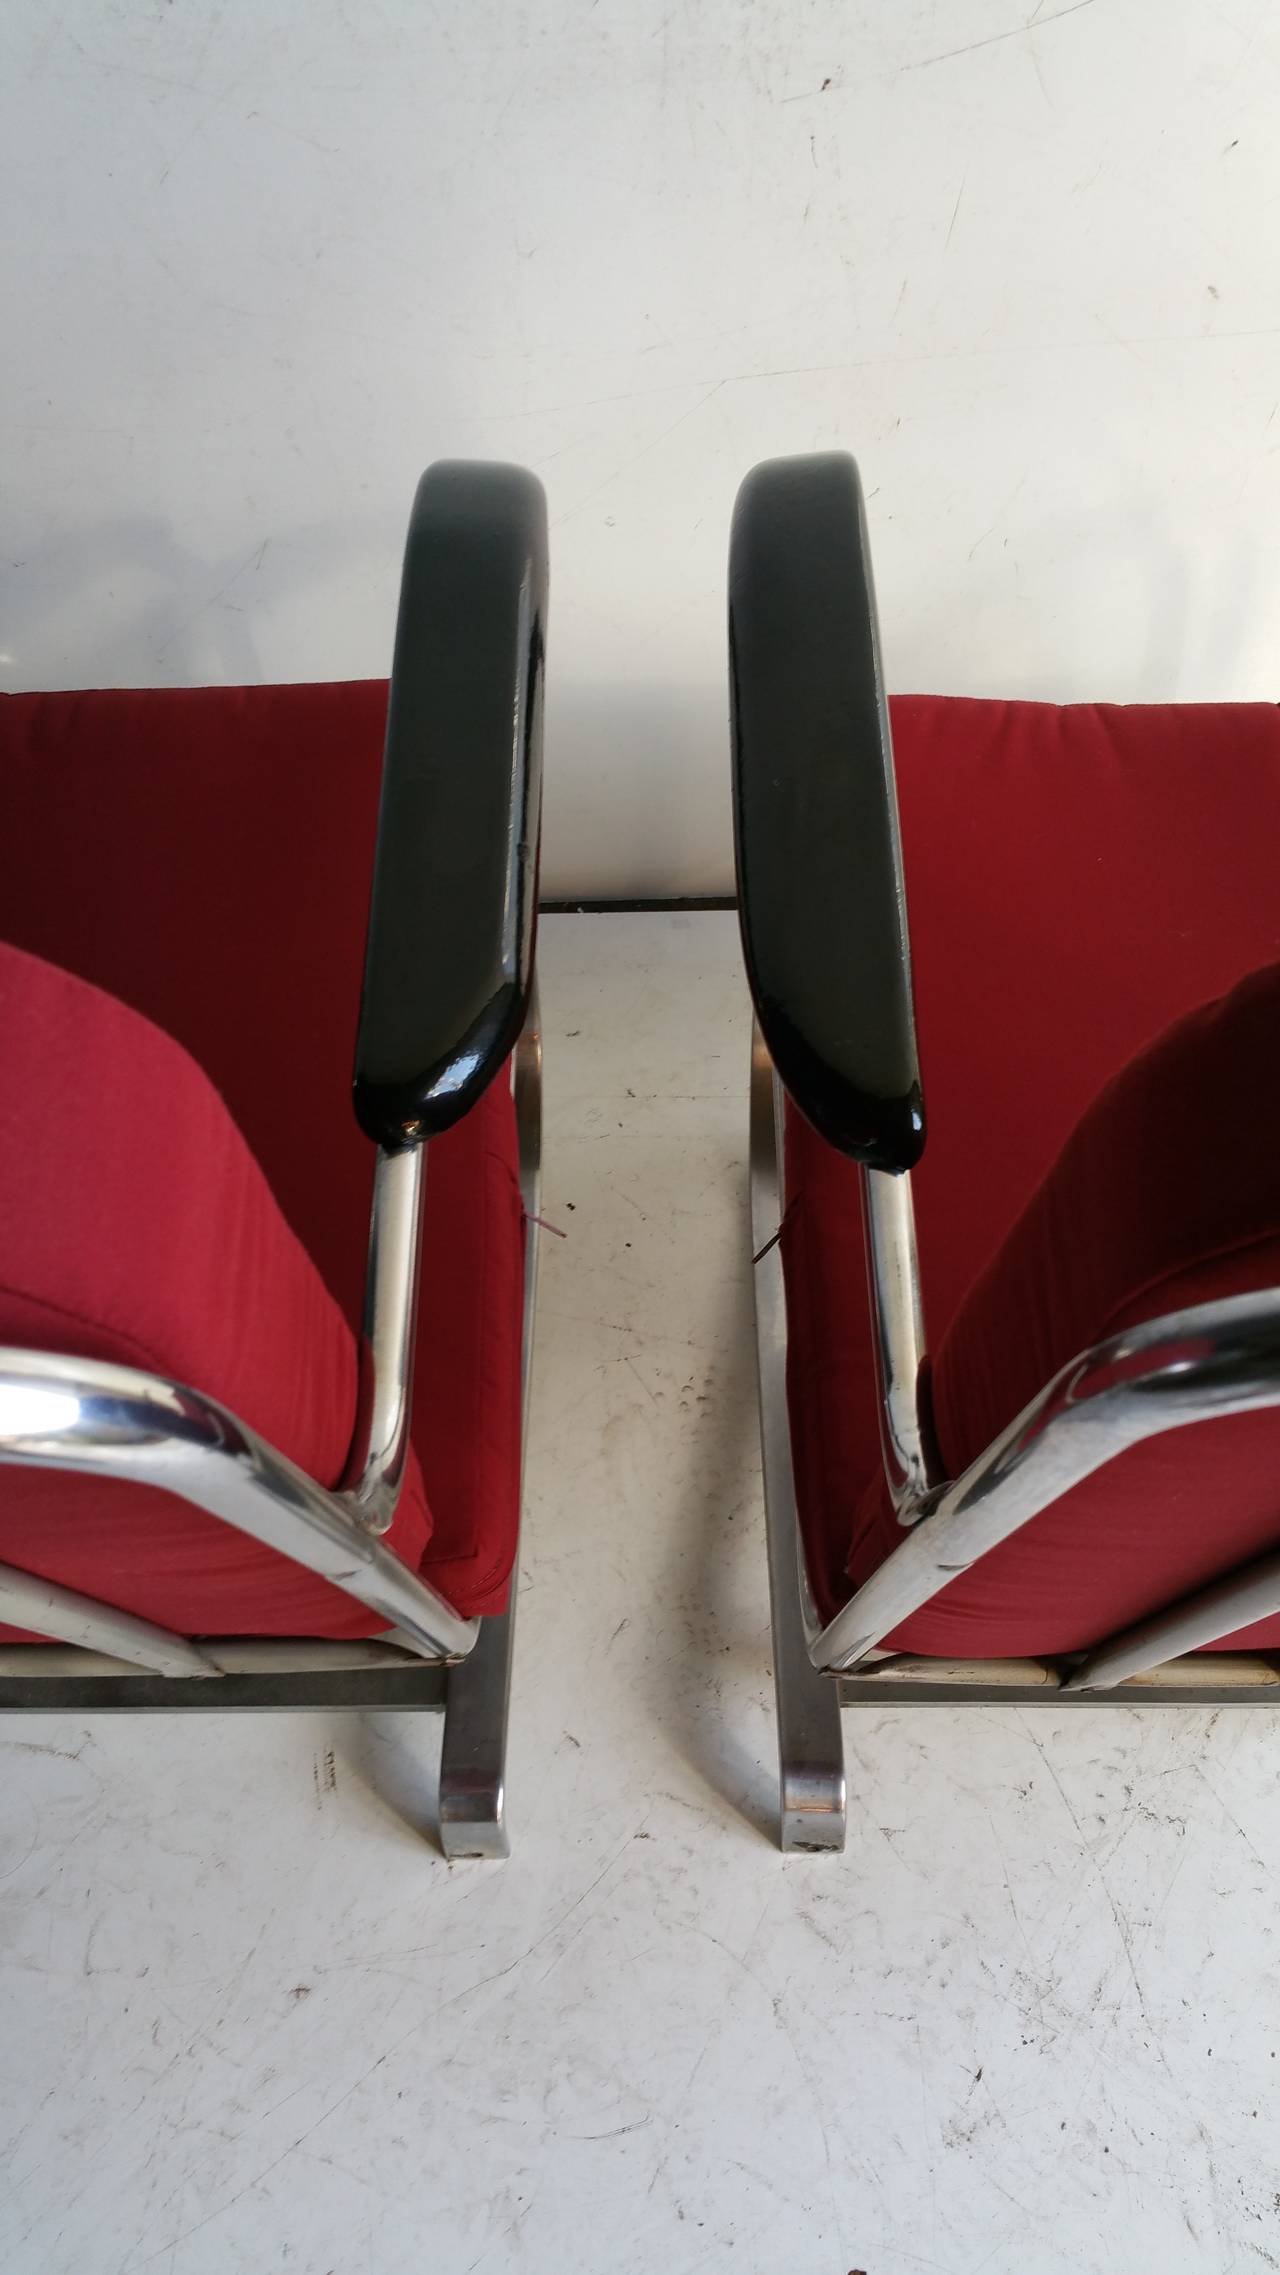 Matched pair Chromed Steel Art Deco Springer Chairs, , LLoyd Mnfg Co. In Good Condition For Sale In Buffalo, NY